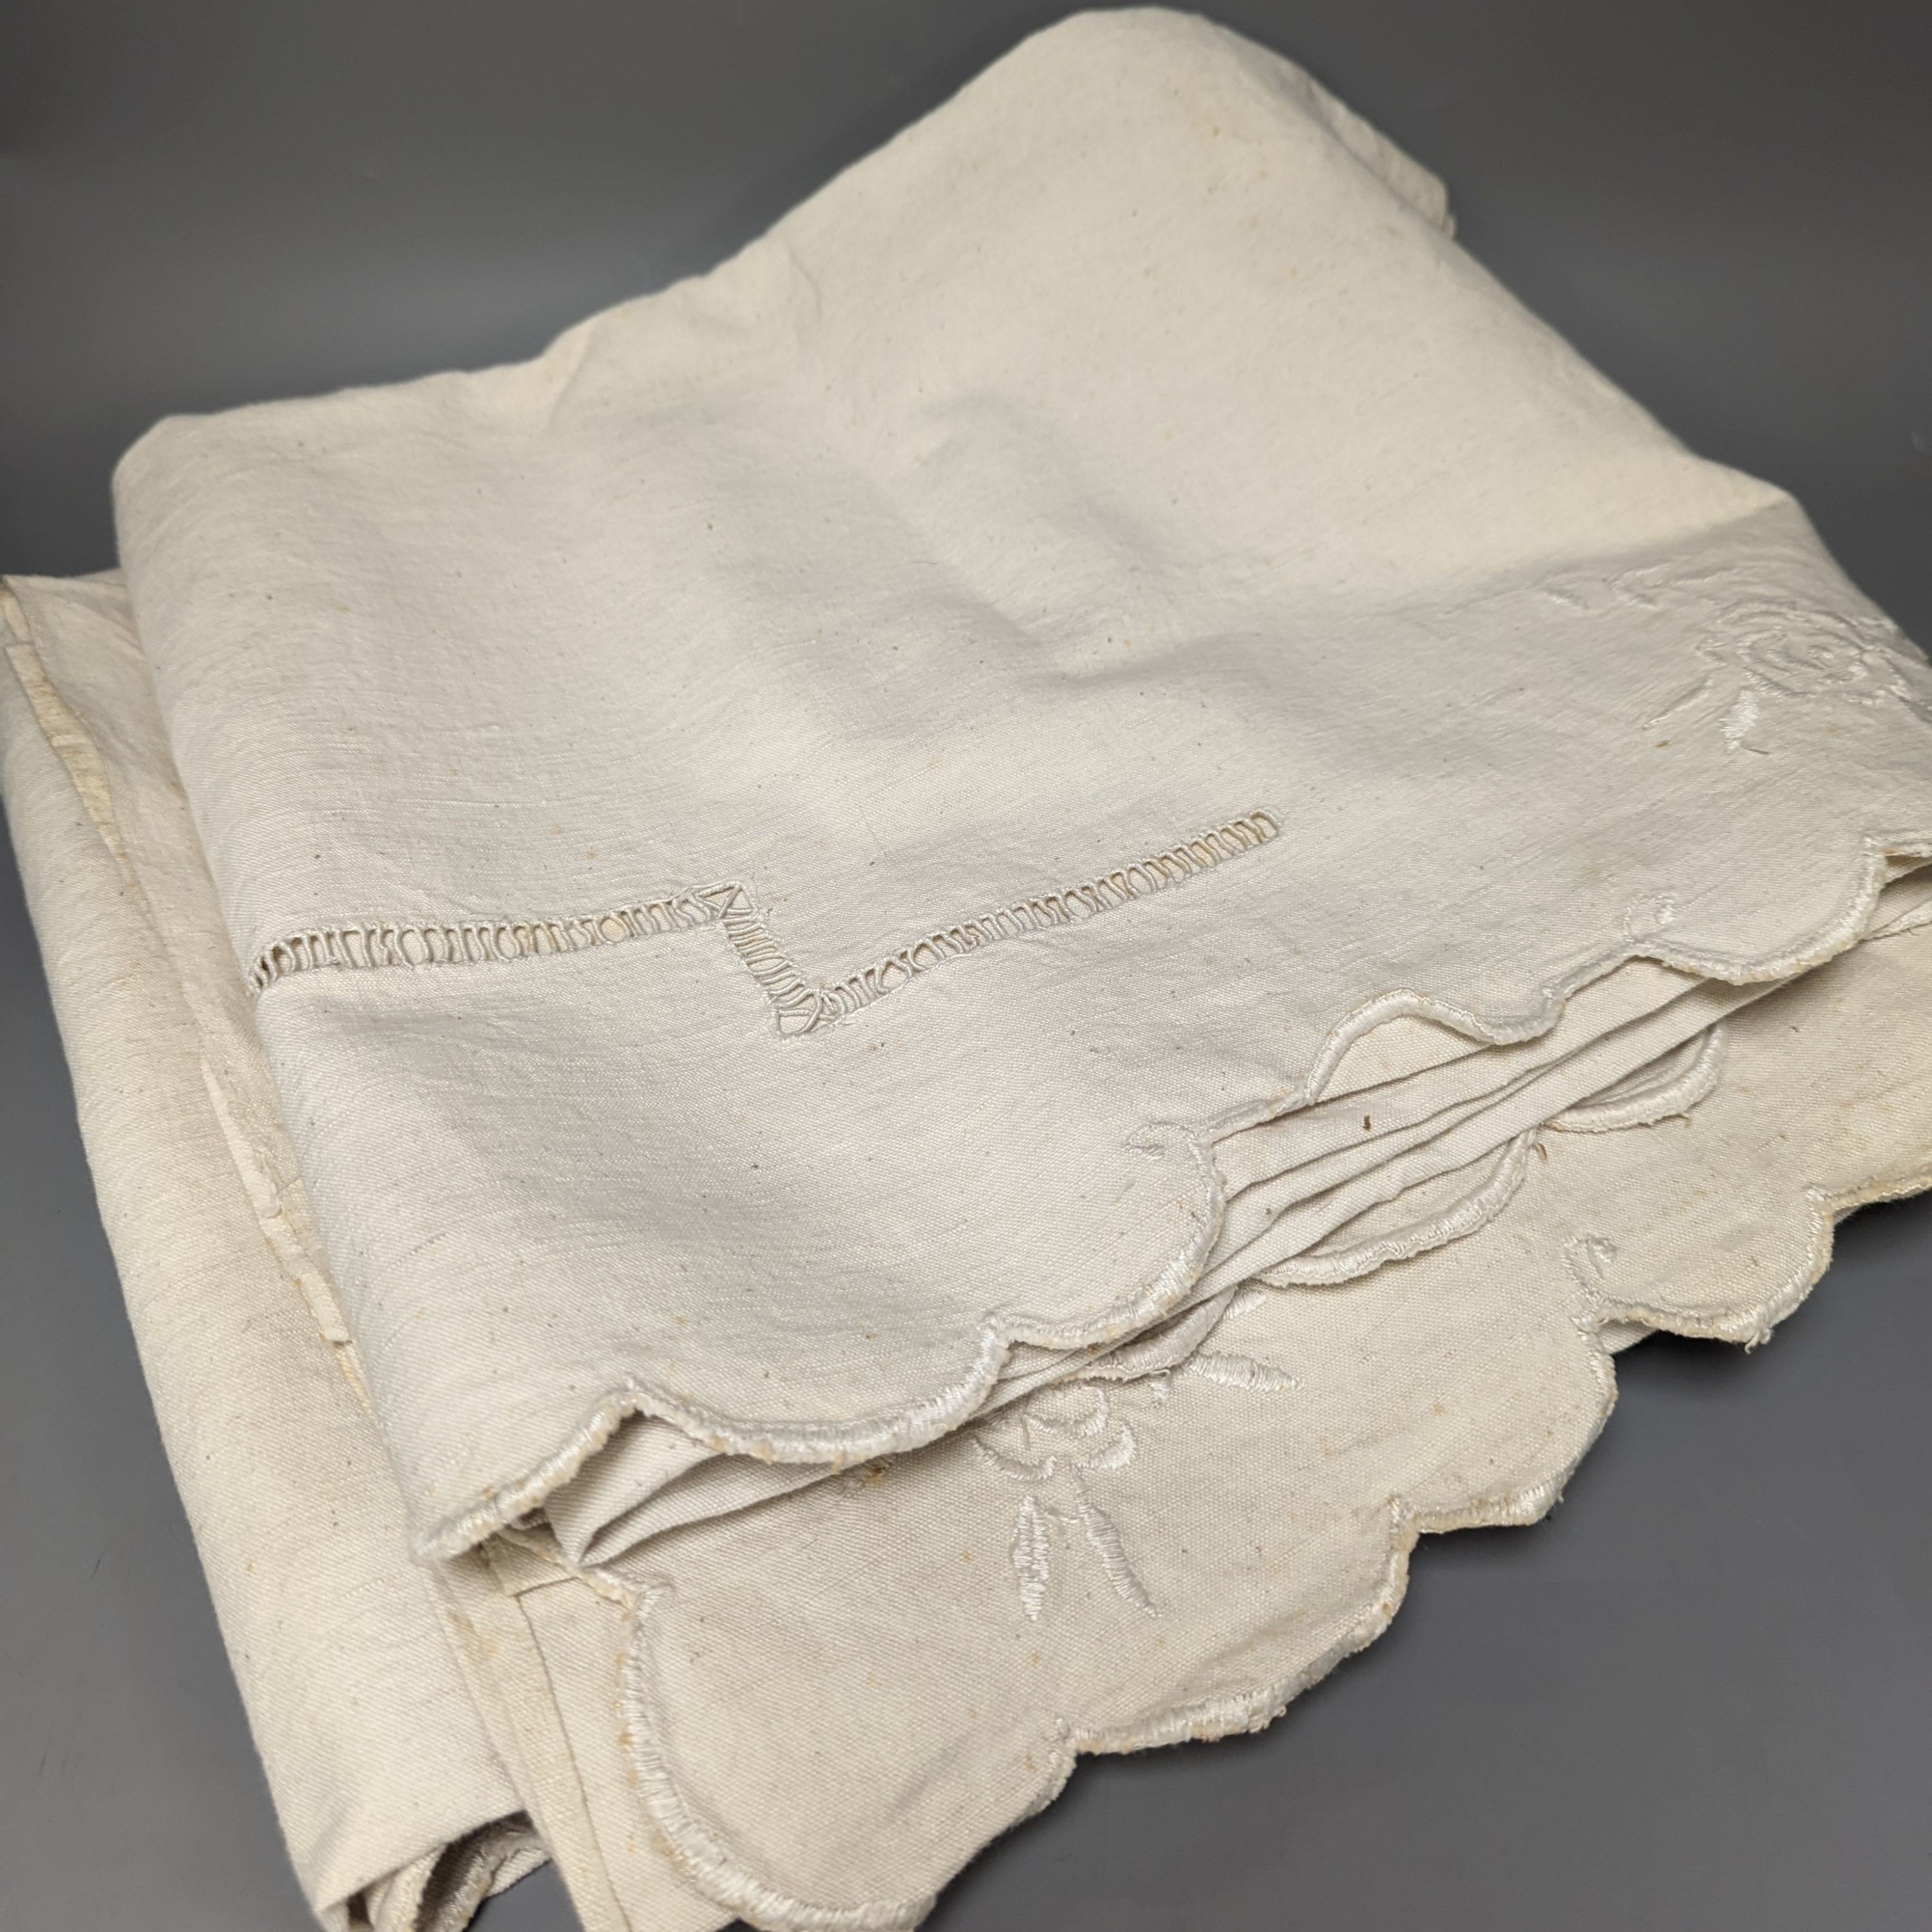 Four embroidered French provincial coarse linen sheets and three plain sheets.